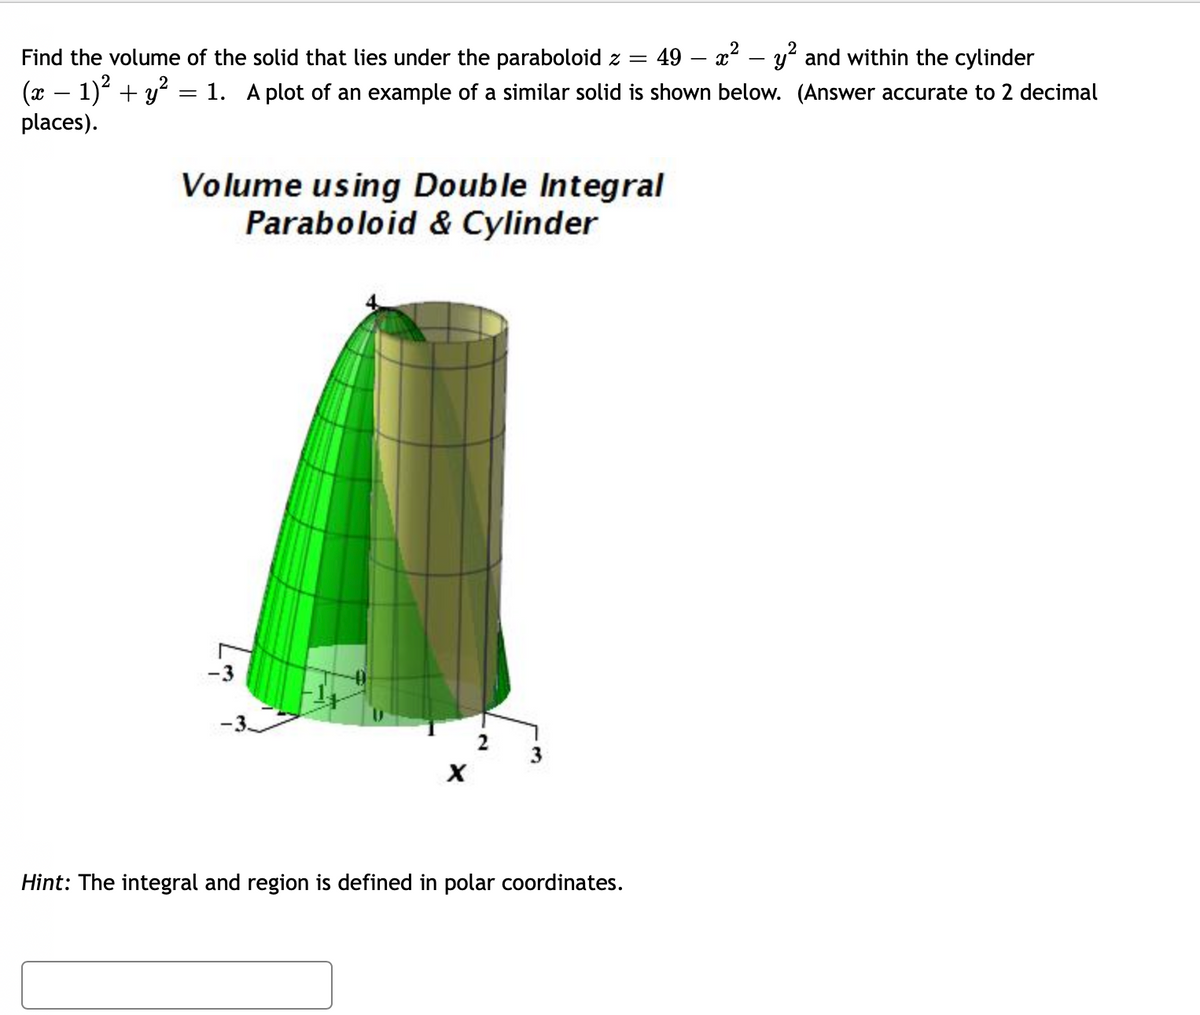 2
Find the volume of the solid that lies under the paraboloid z = 49 - x² - y² and within the cylinder
(x − 1)² + y² = 1. A plot of an example of a similar solid is shown below. (Answer accurate to 2 decimal
places).
Volume using Double Integral
Paraboloid & Cylinder
X
Hint: The integral and region is defined in polar coordinates.